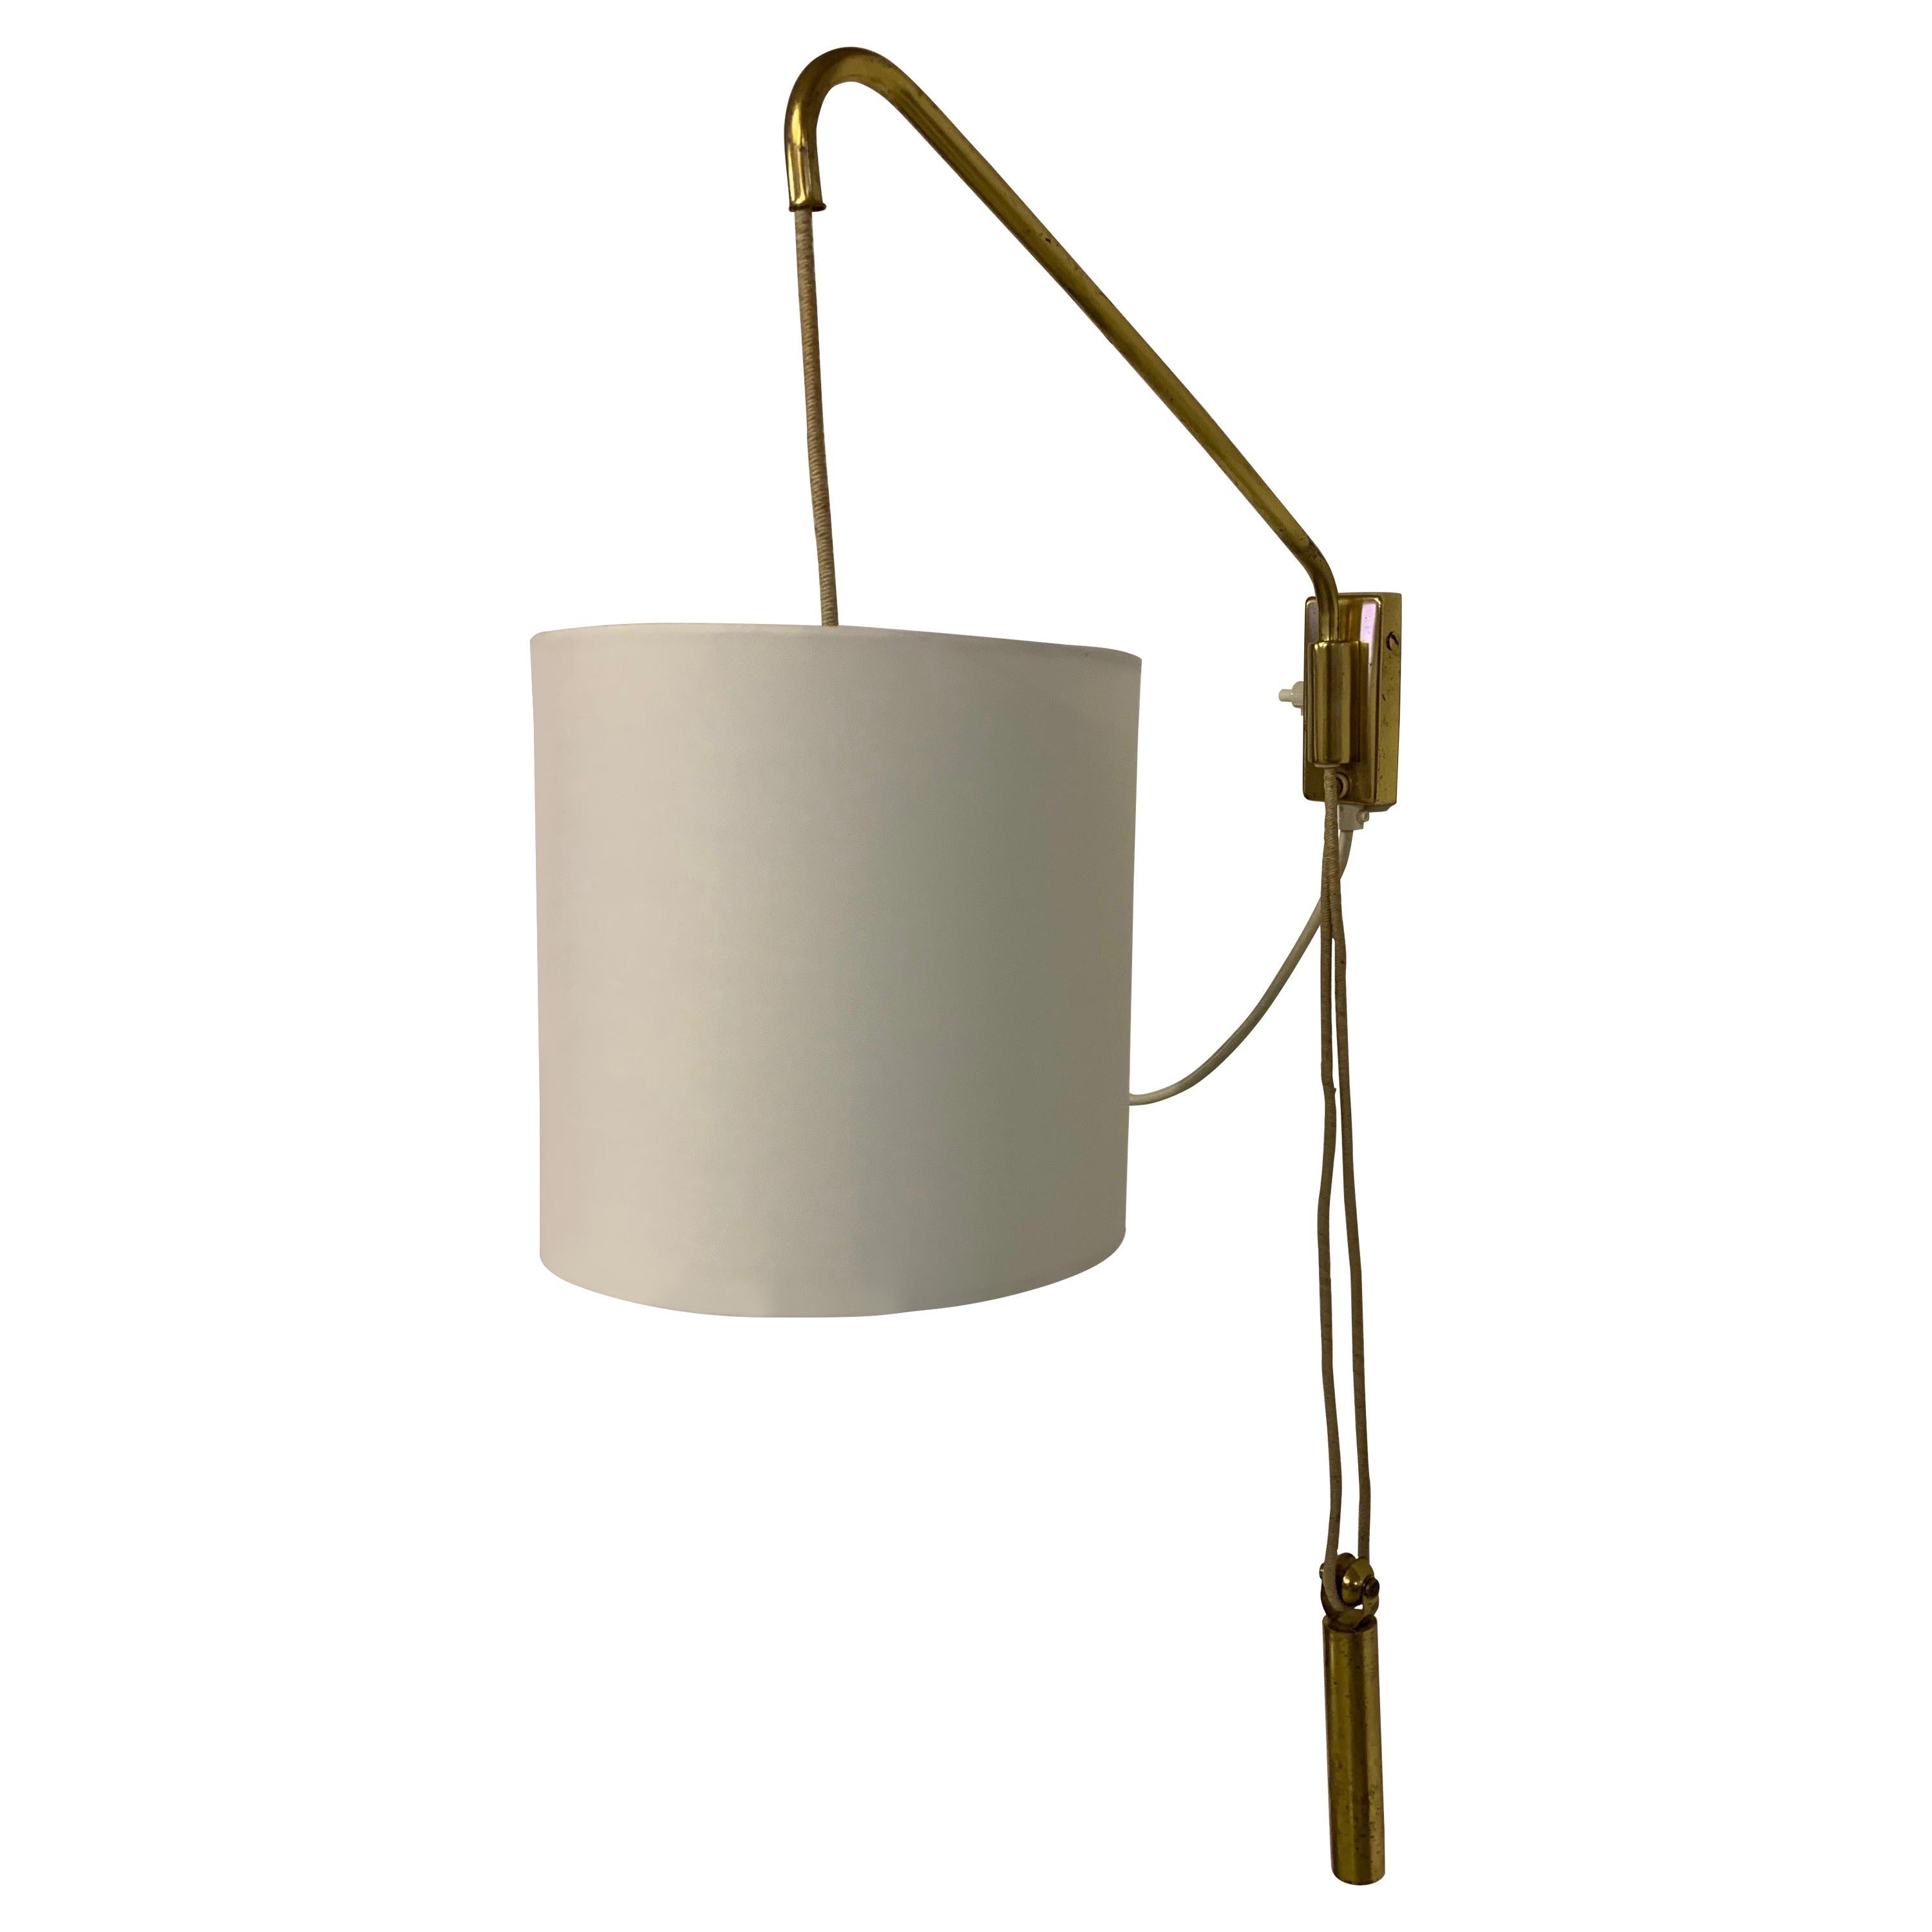 Adjustable Wall Light with Counterweight